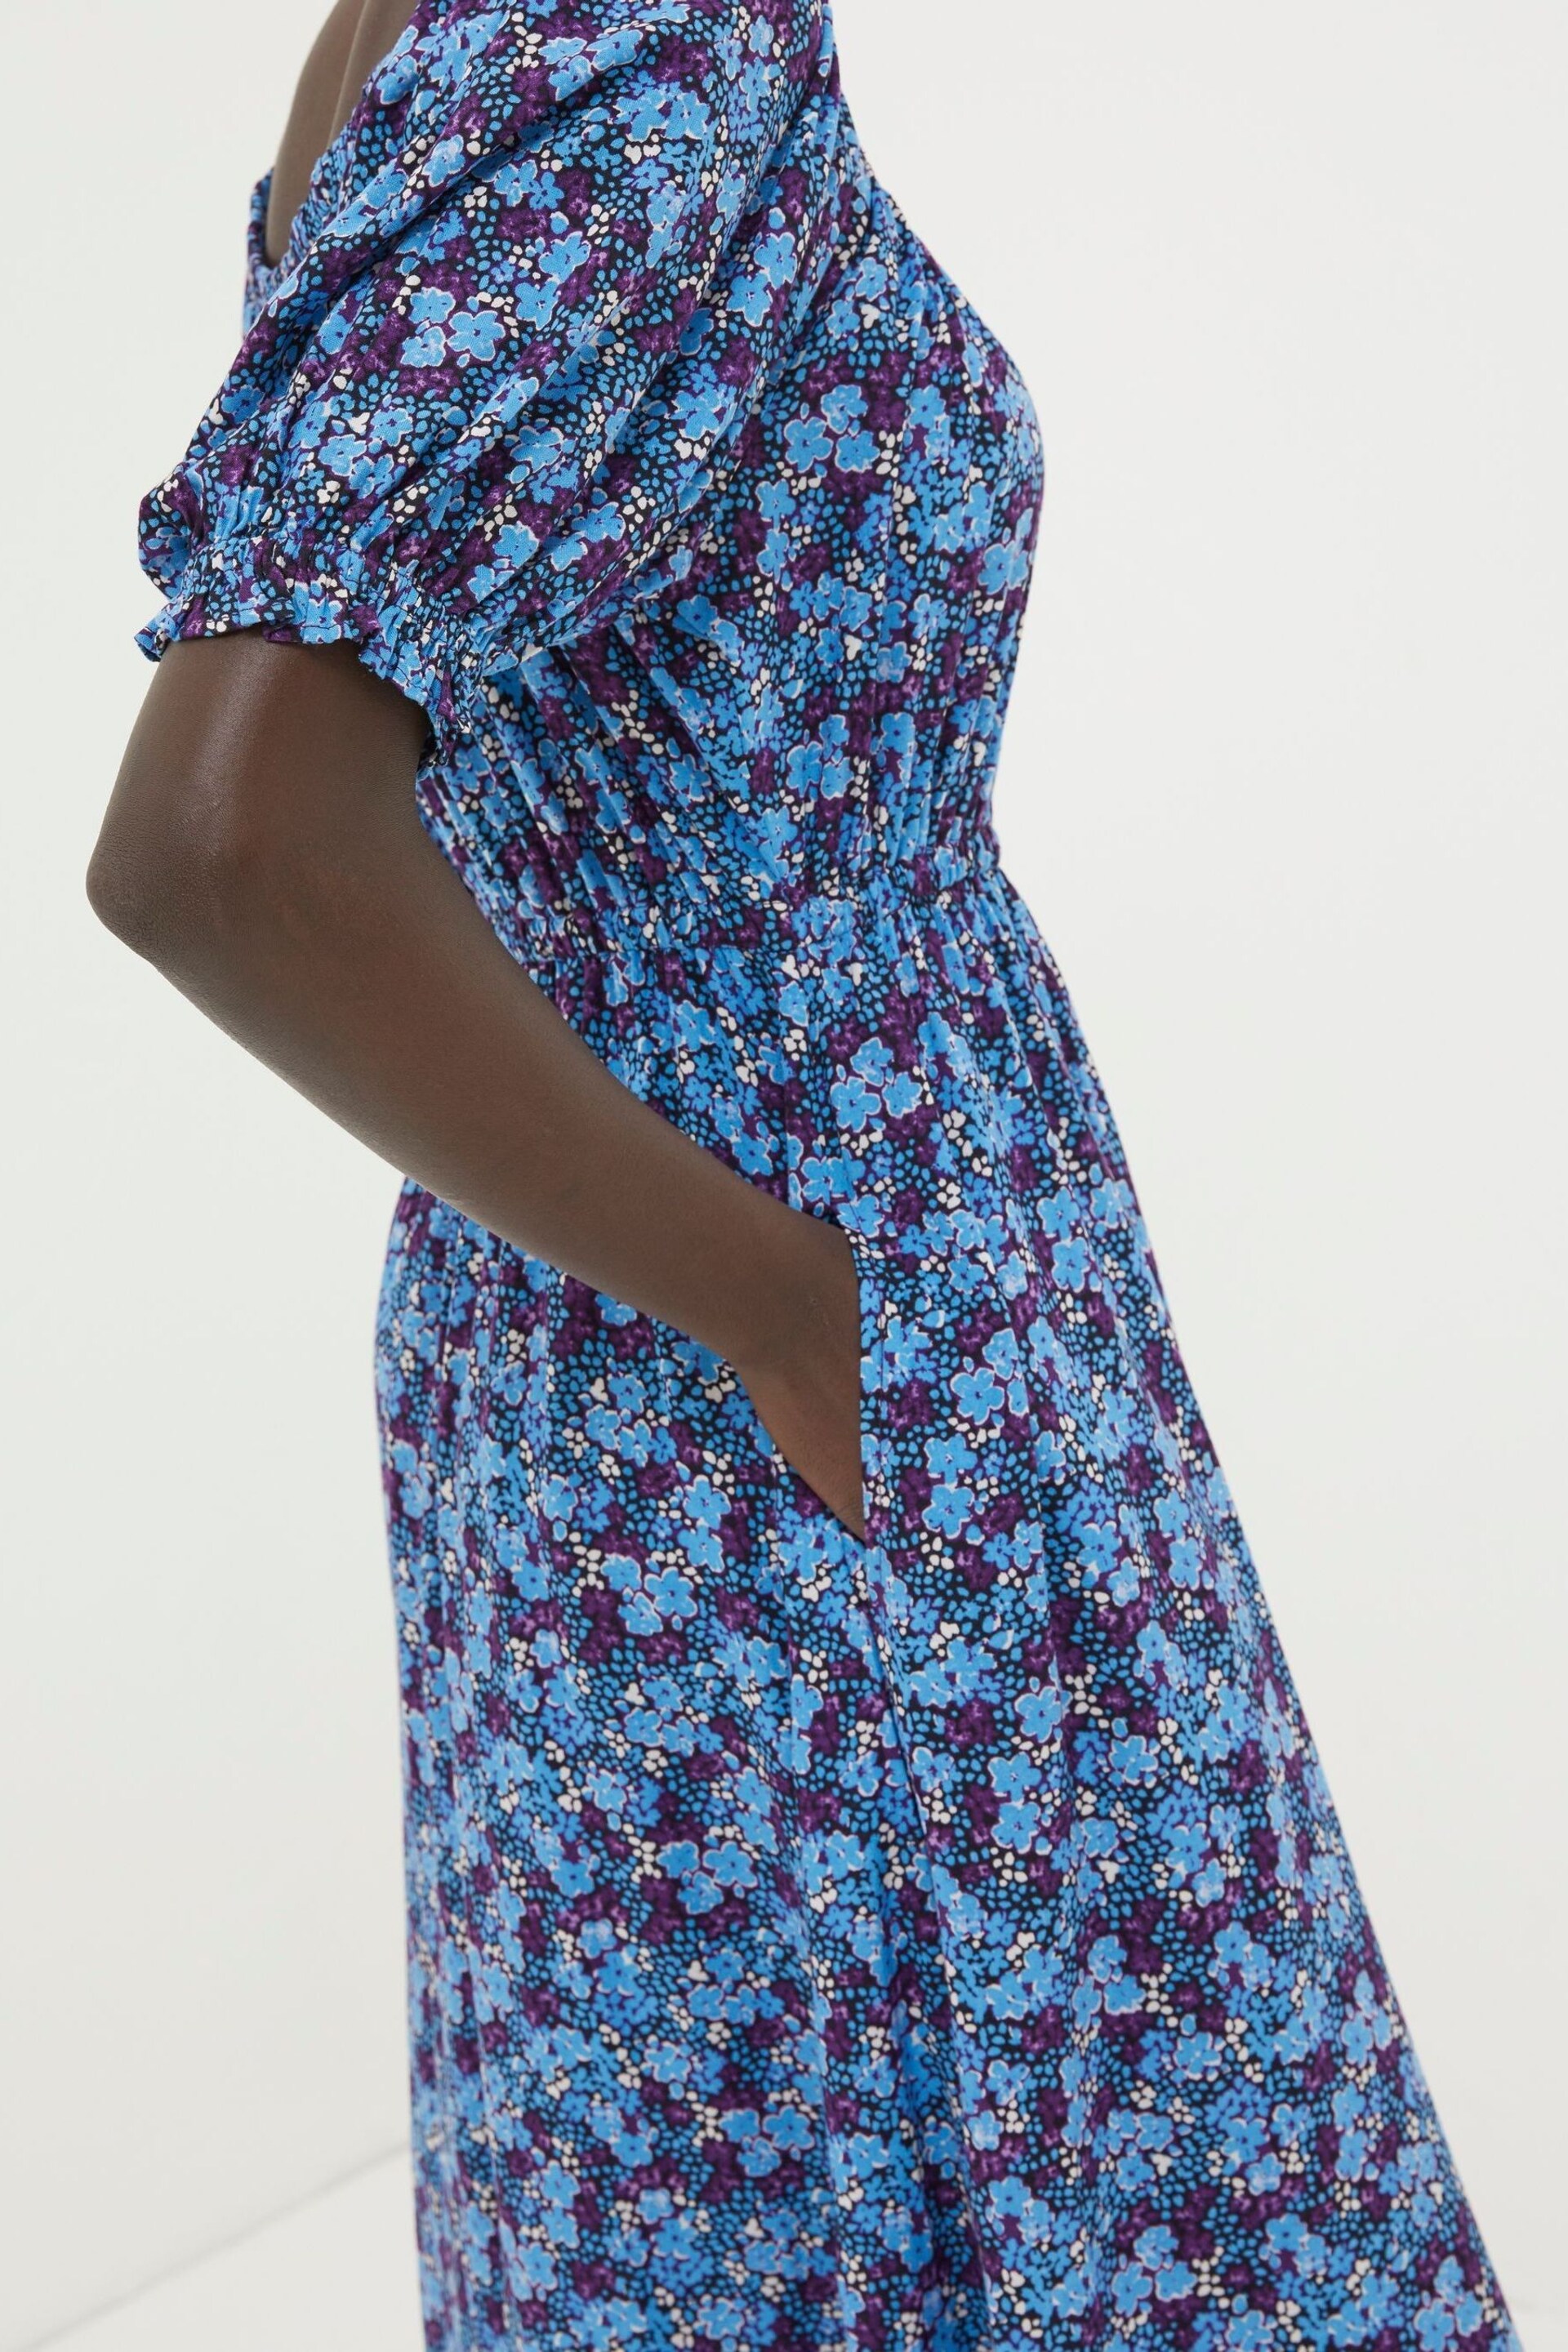 FatFace Purple Ink Floral Midi Dress - Image 4 of 6